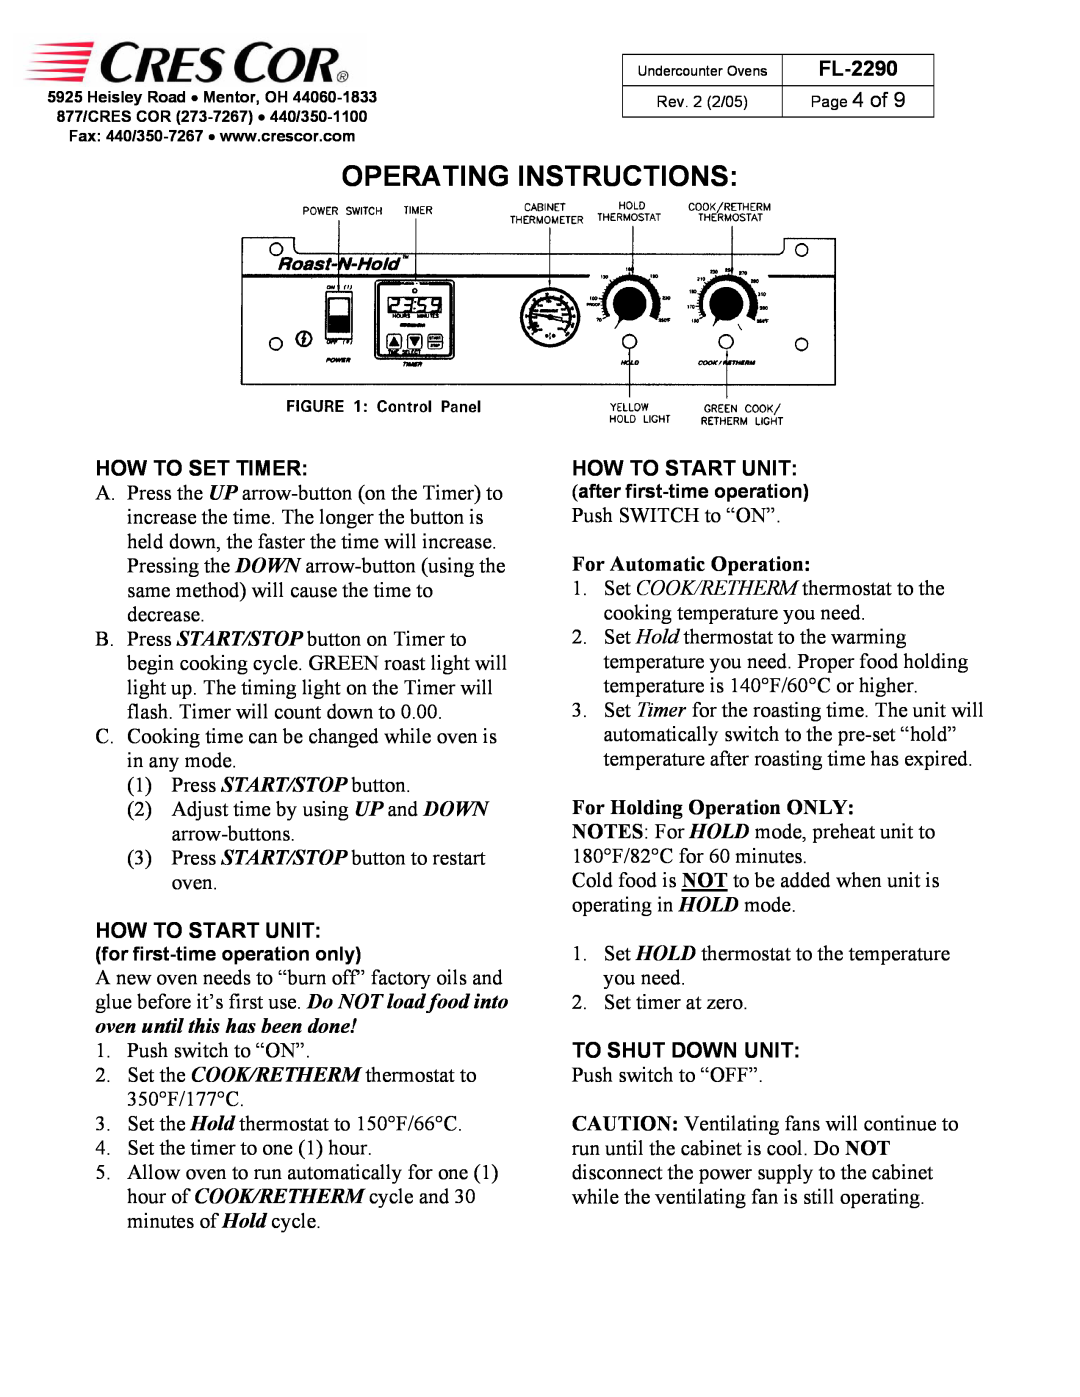 Cres Cor CO151X185B manual Operating Instructions, FL-2290, How To Set Timer, How To Start Unit, For Automatic Operation 